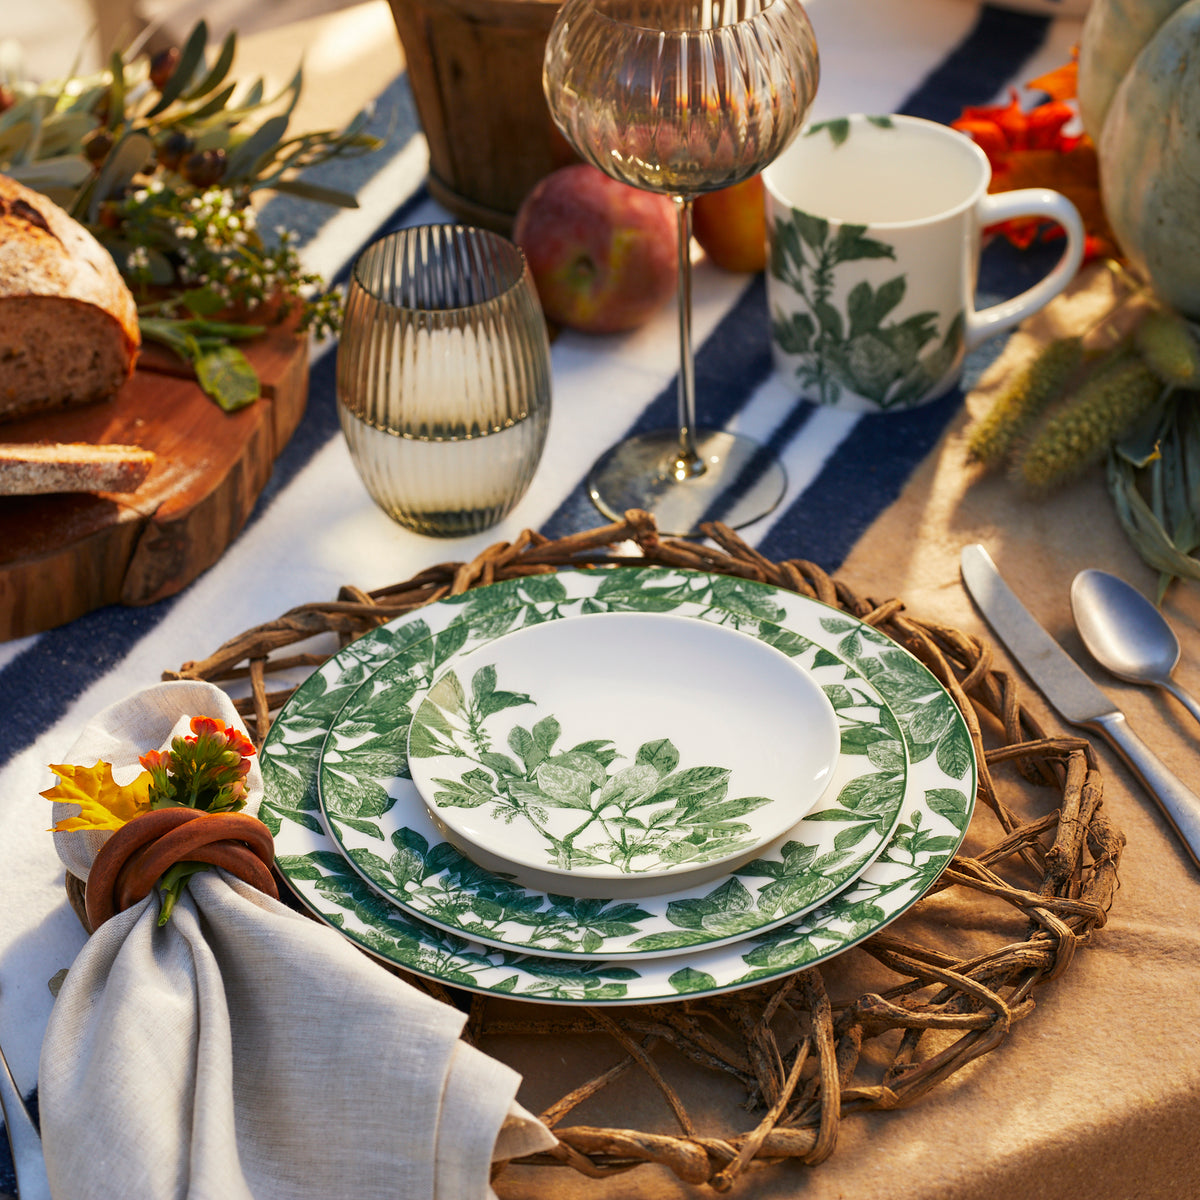 A table setting with a premium Caskata Arbor Green Rimmed Dinner Plate featuring botanical details, glasses, a napkin adorned with a flower, and bread in the background. The table is covered with a striped cloth and decorated with fruits and flowers.